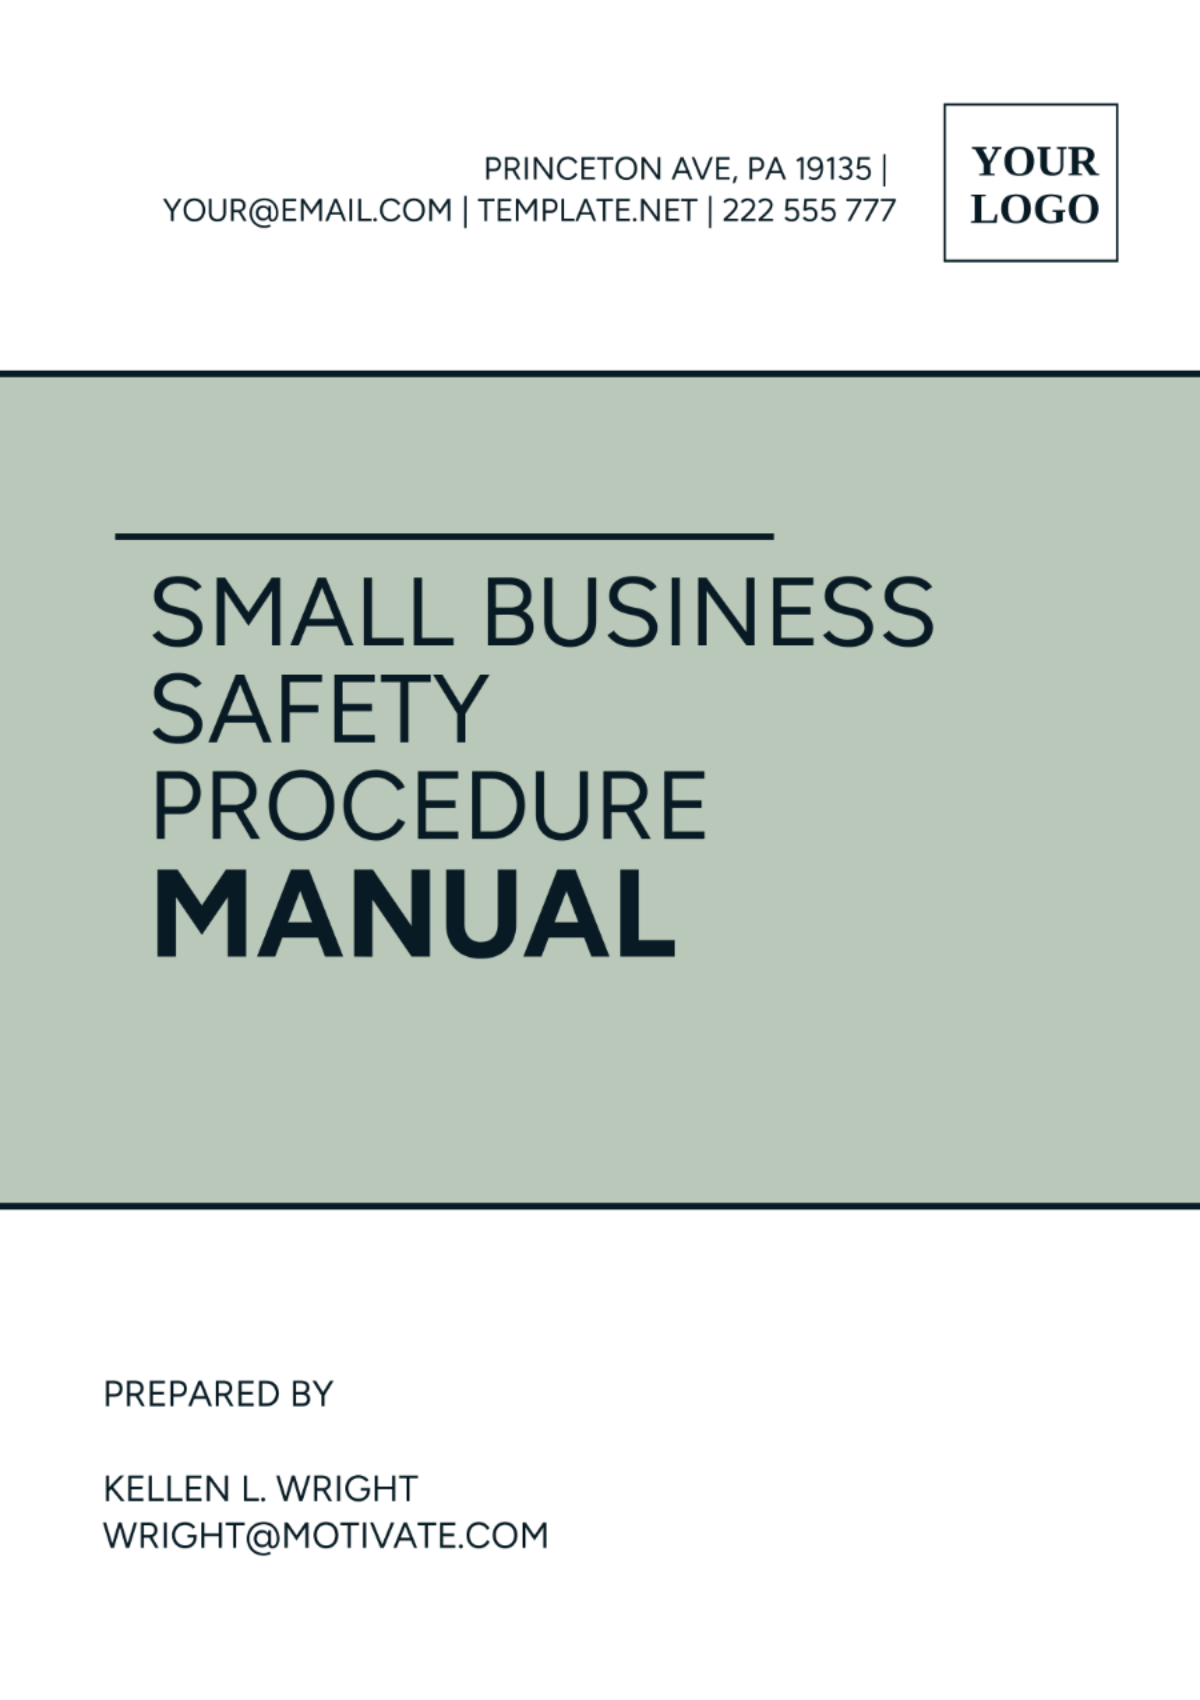 Free Small Business Safety Procedure Manual Template